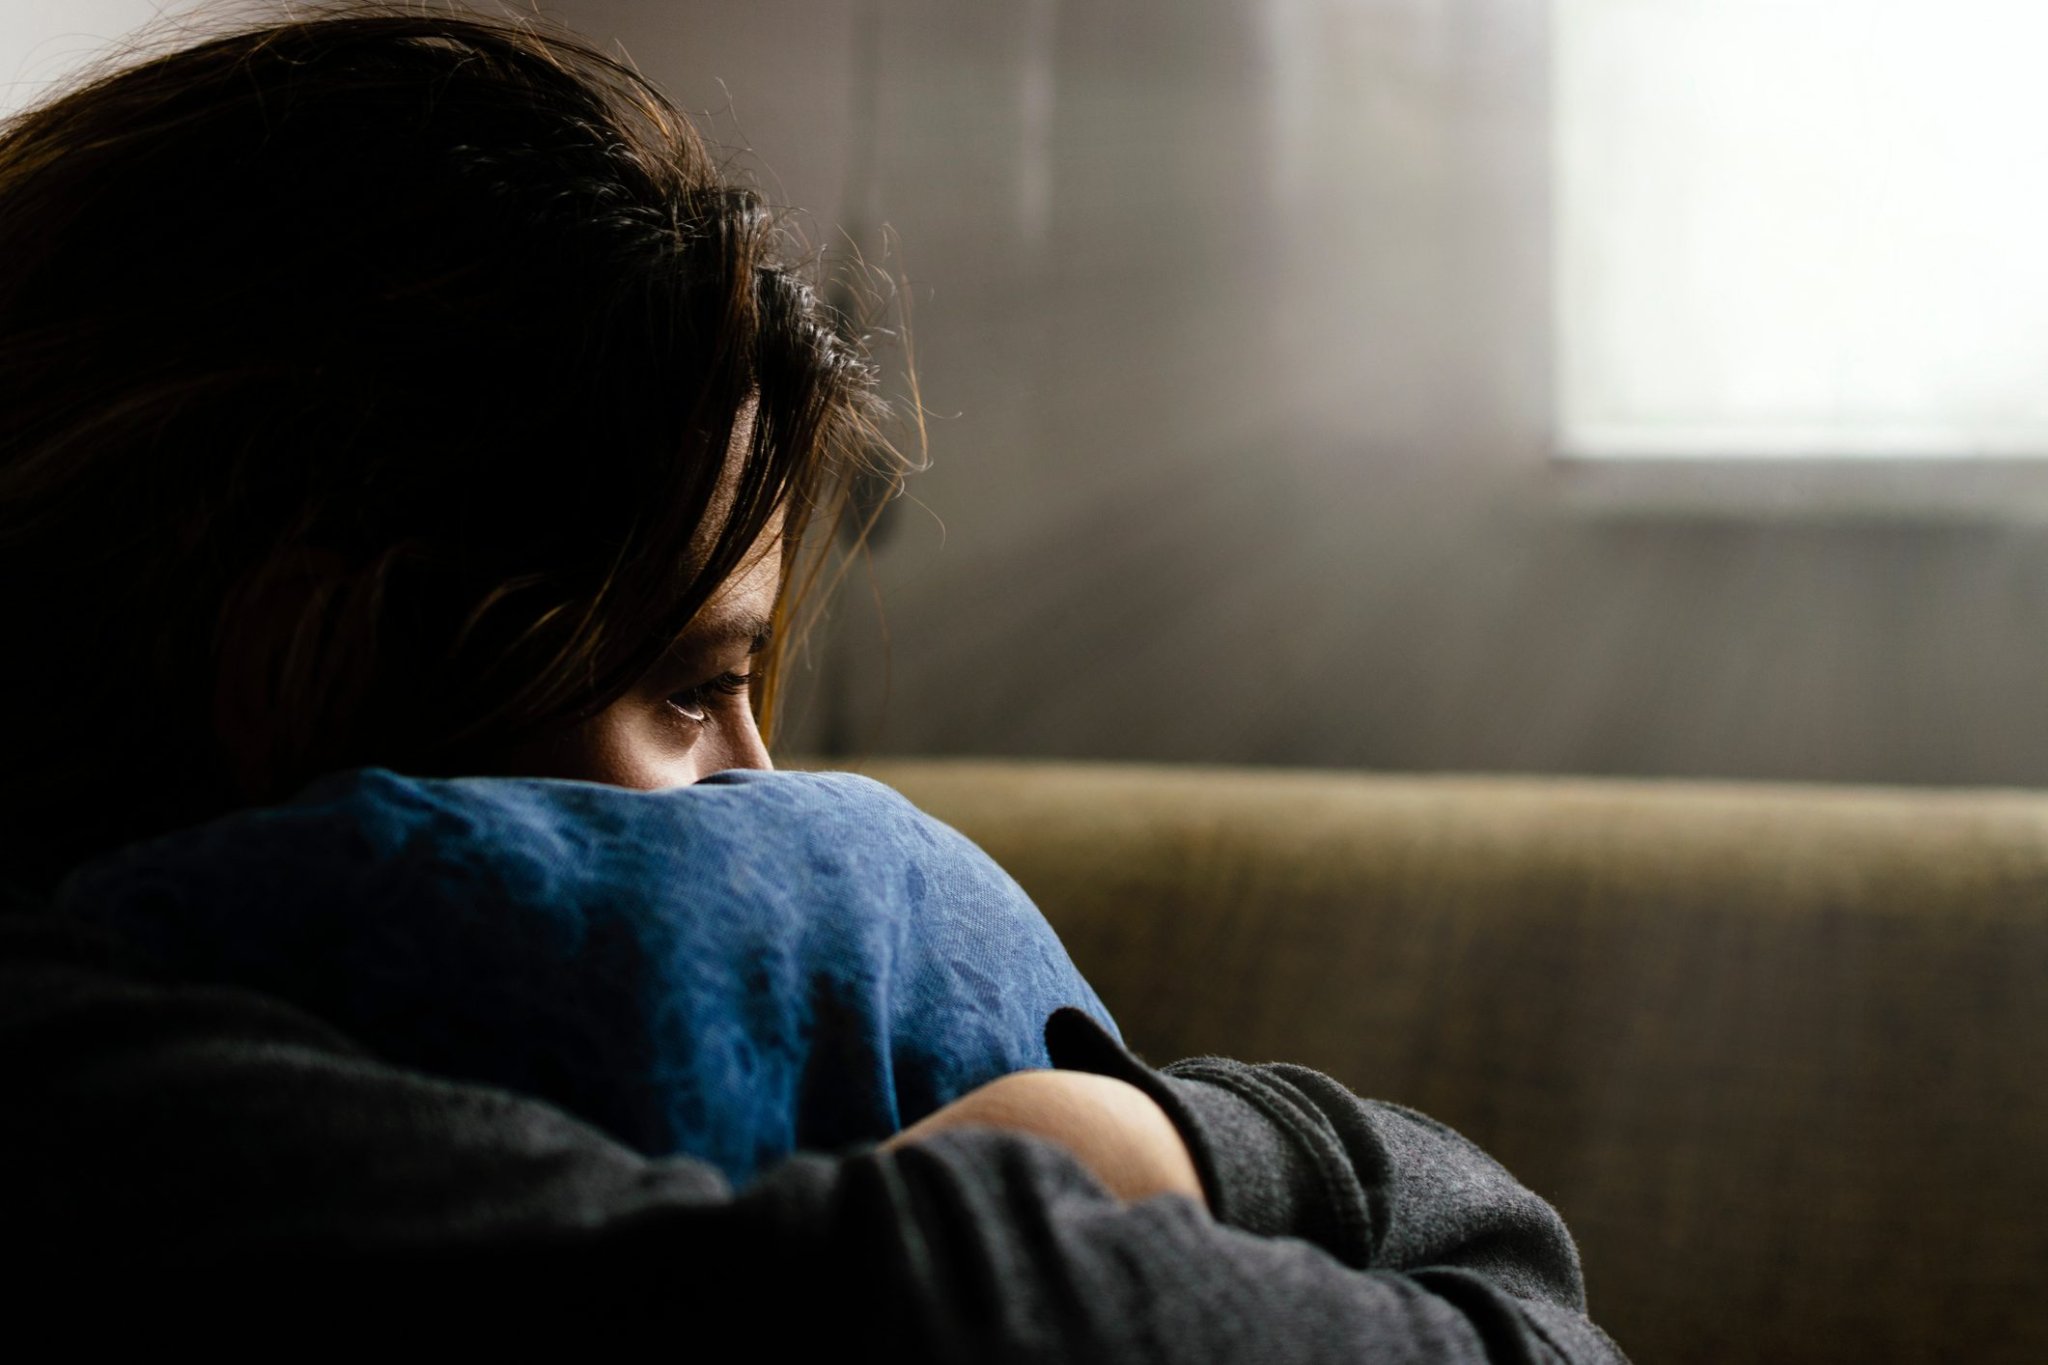 Low-Grade Depression Risk During Coronavirus—How to Protect Yourself